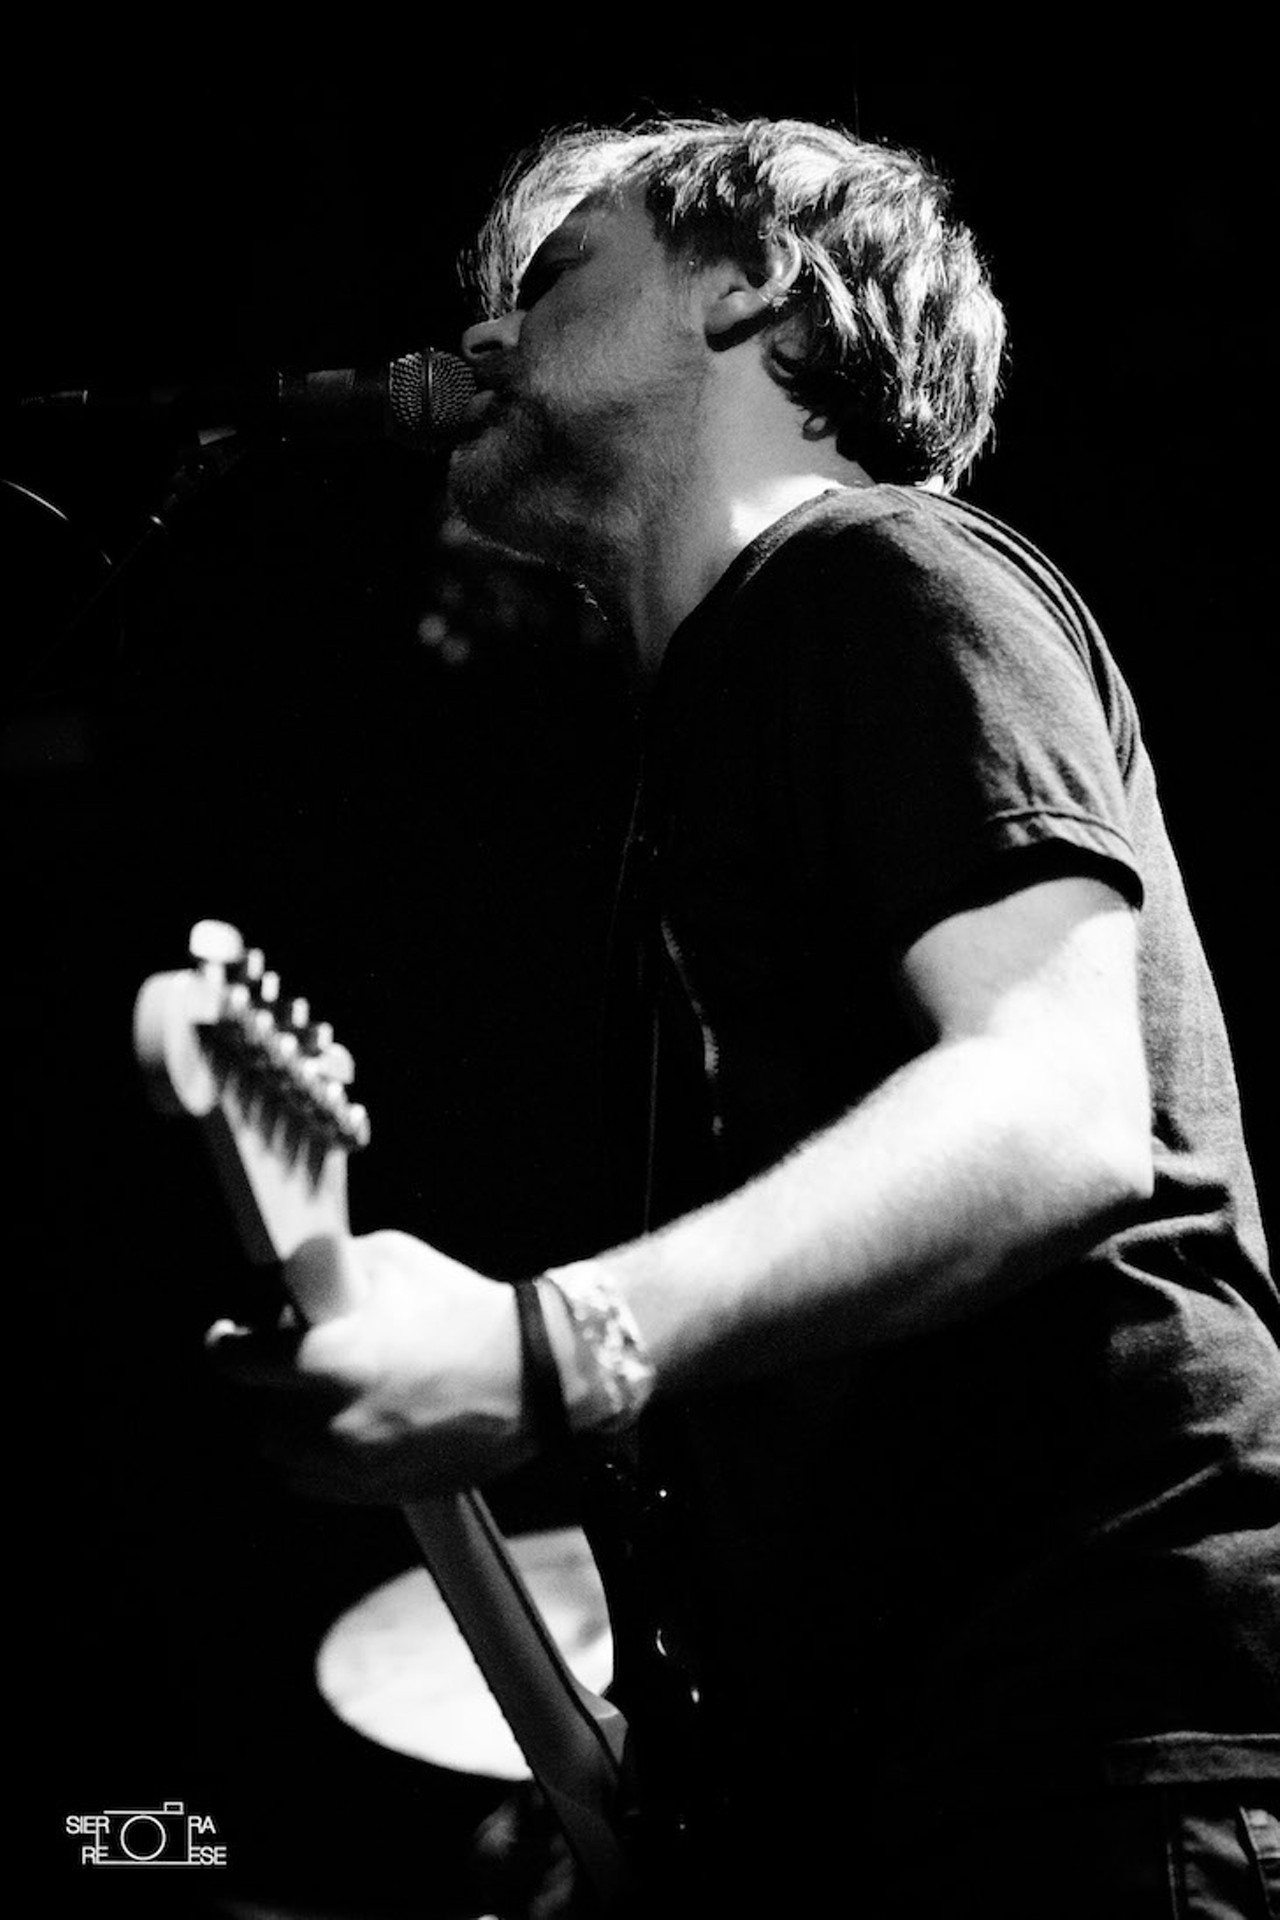 Photos from Local H at the Social